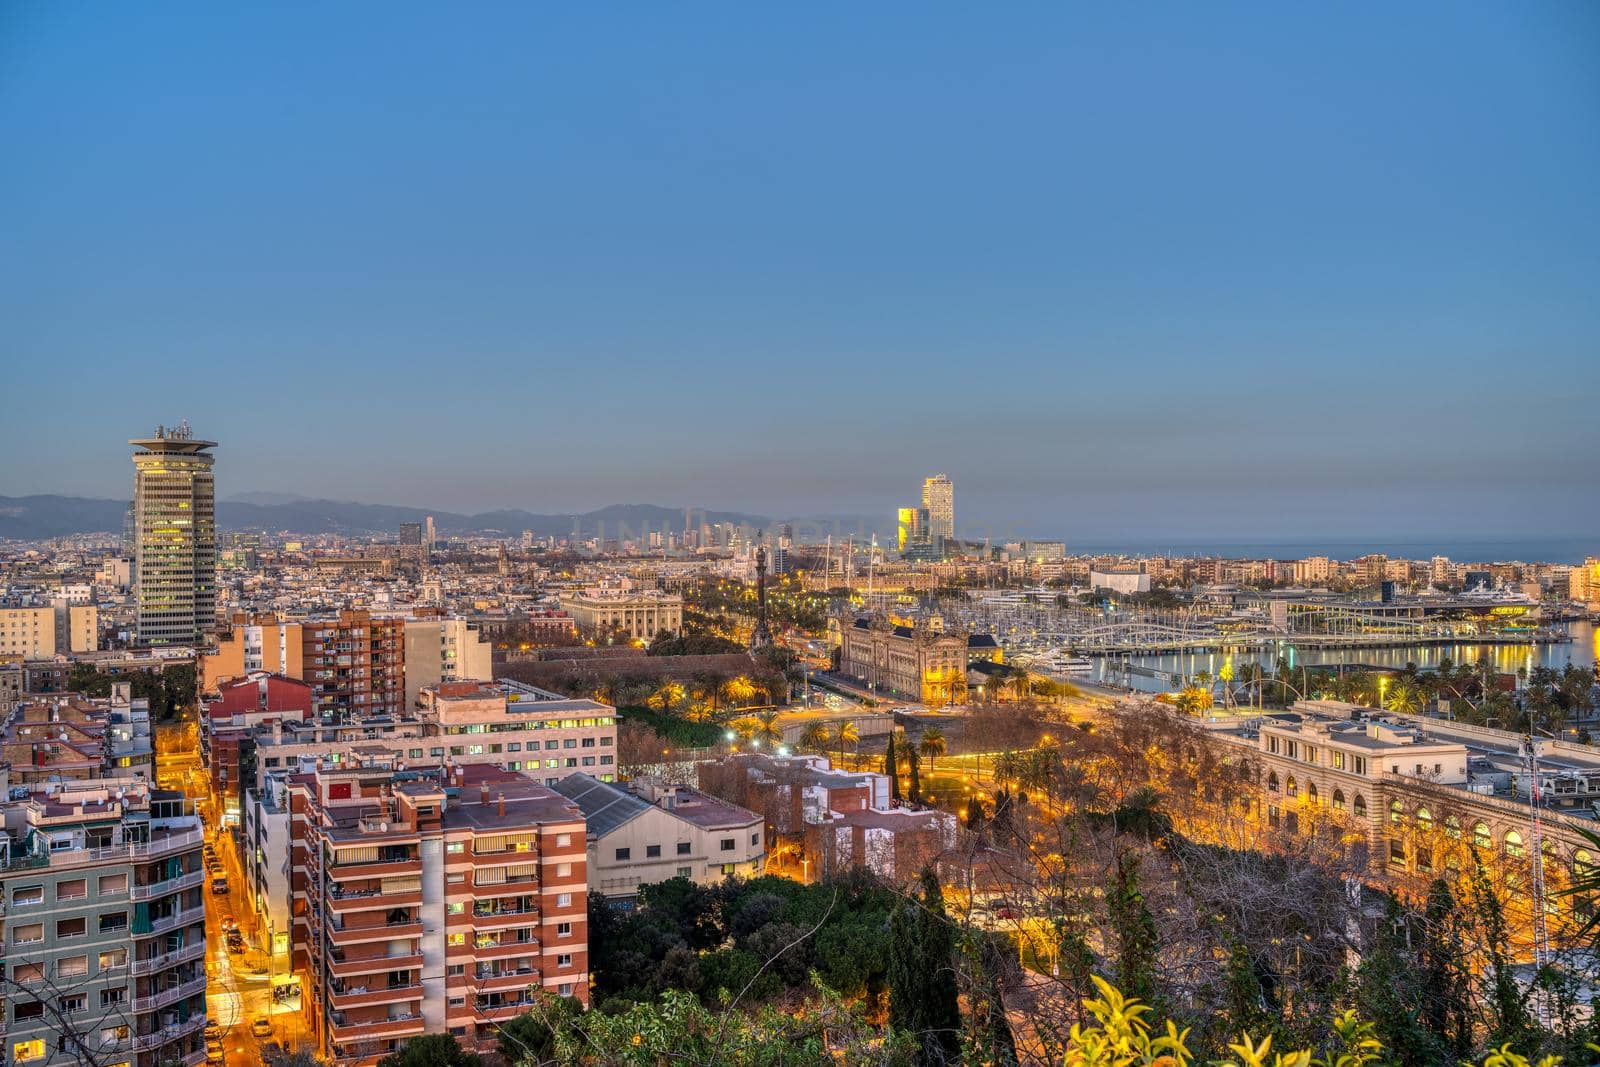 View over downtown Barcelona from Montjuic mountain at dusk